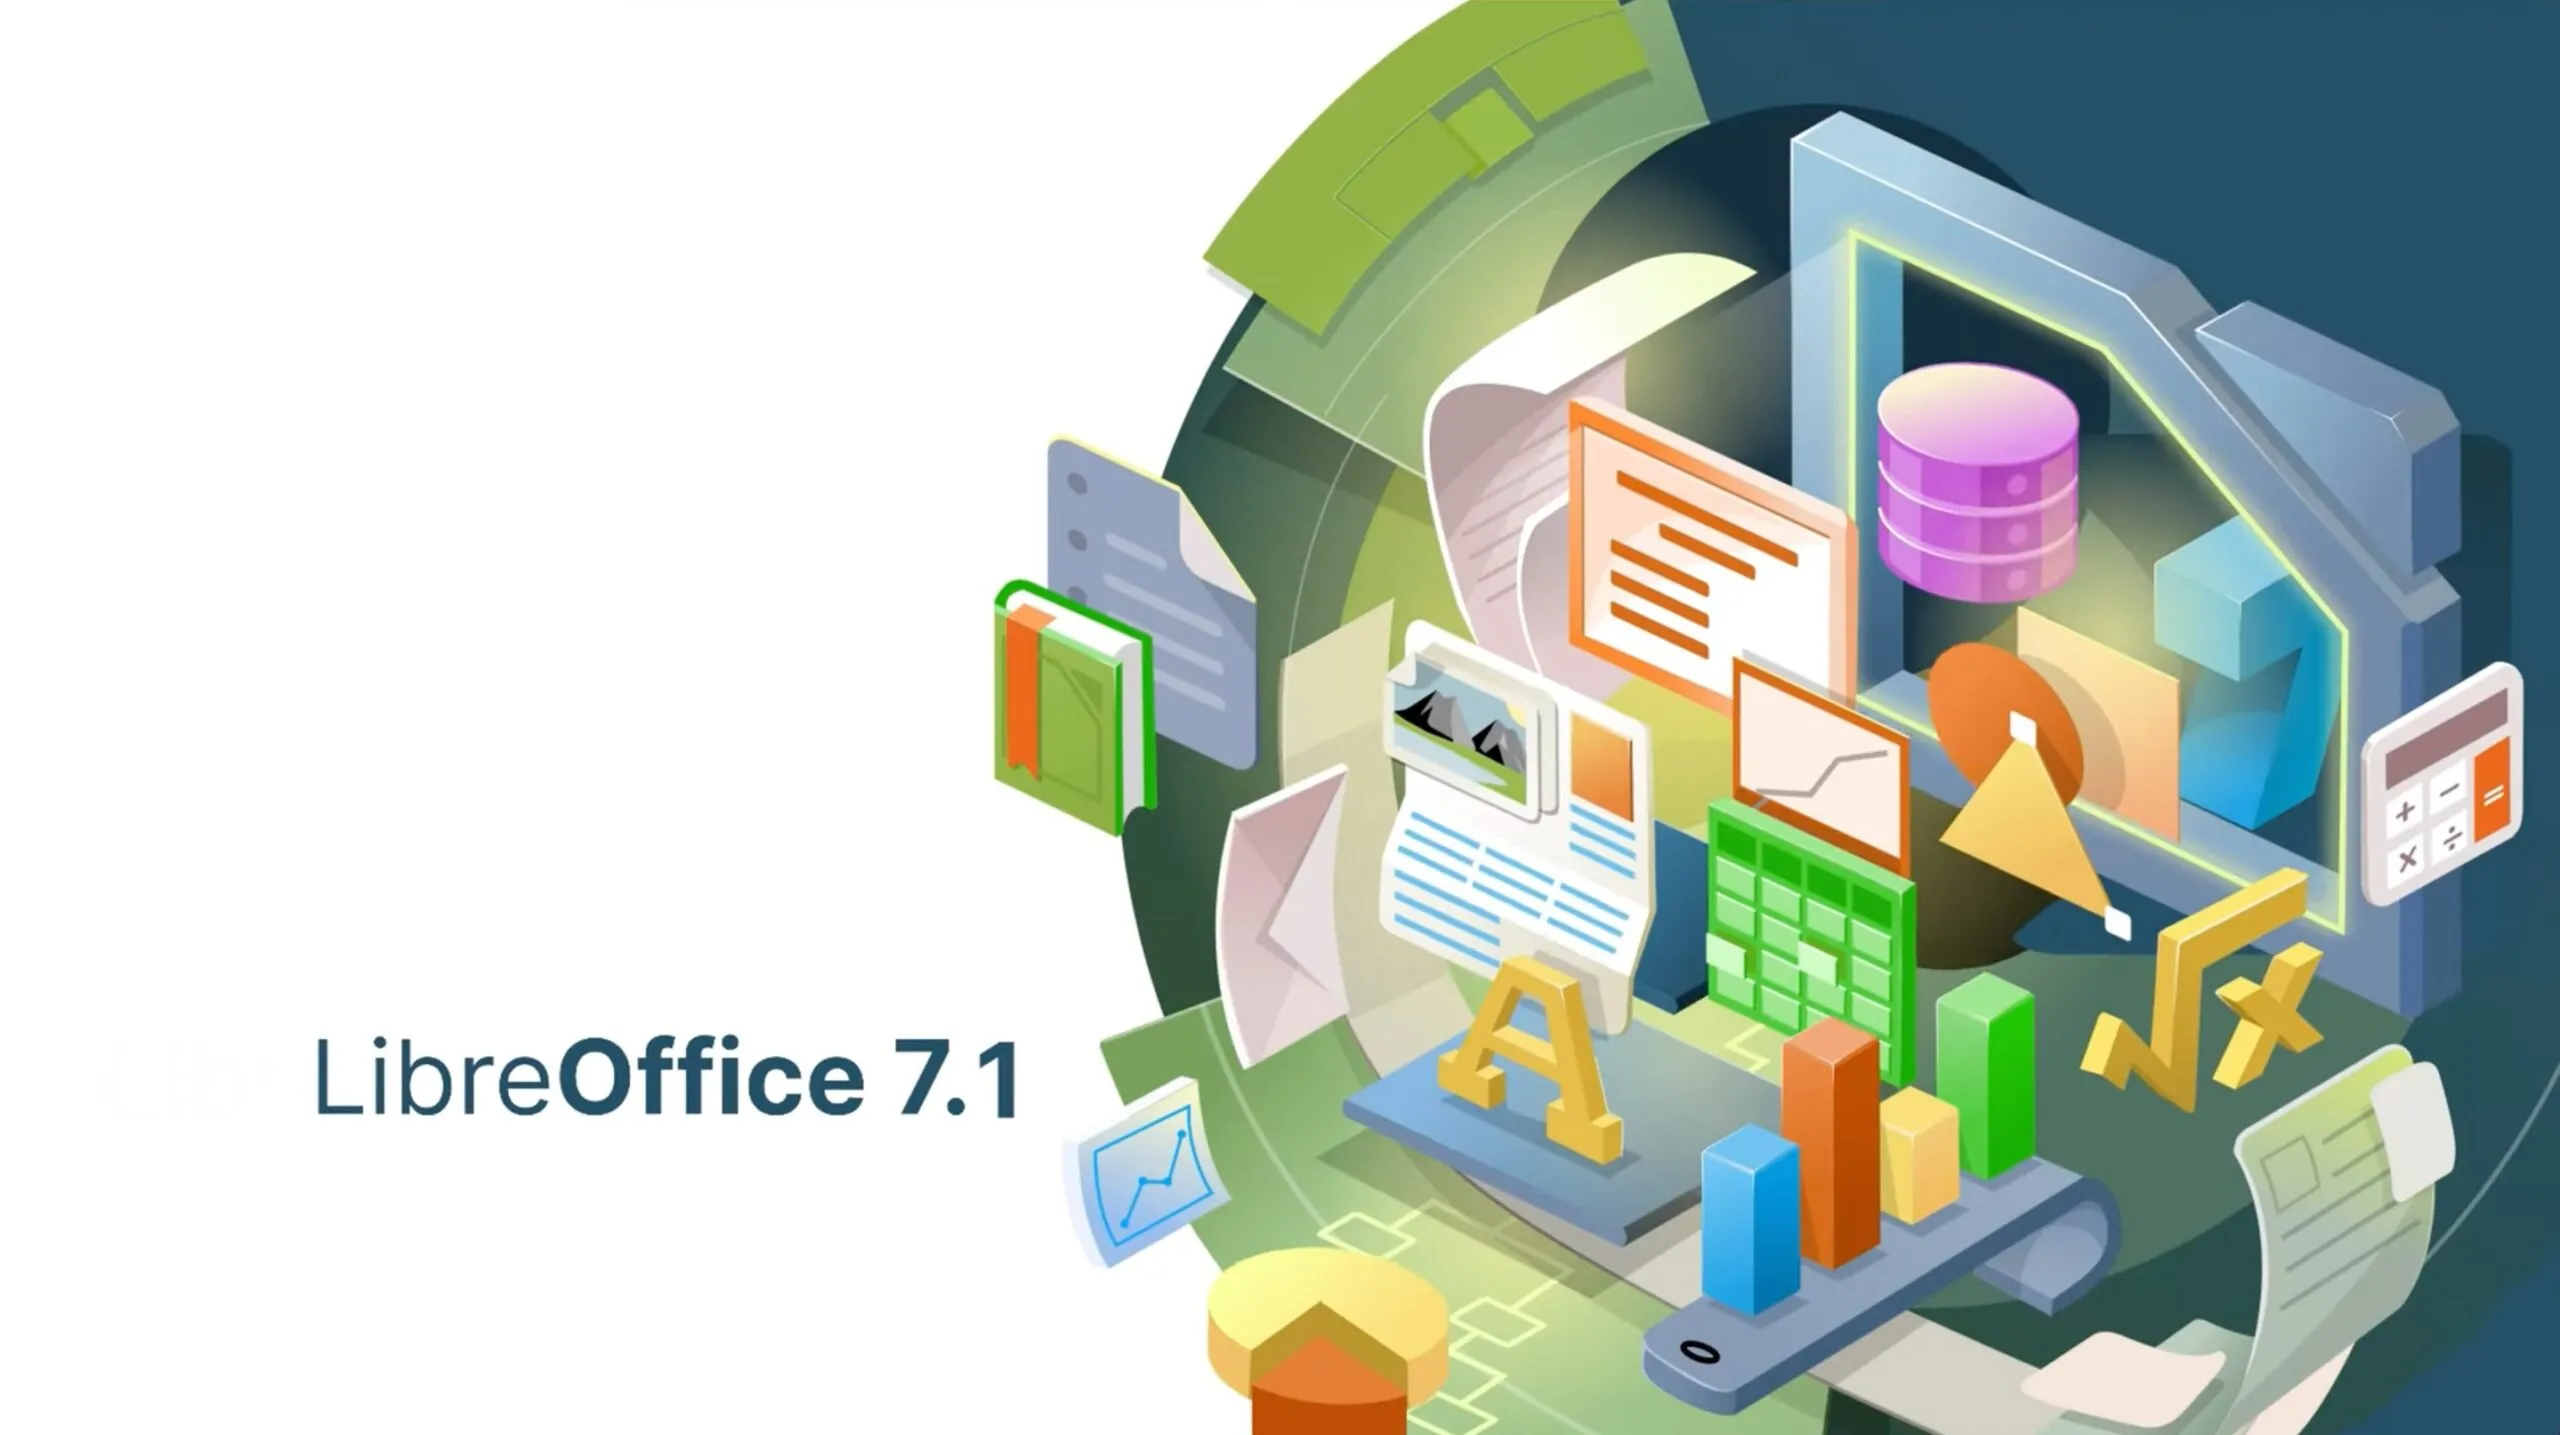 LibreOffice 7.1.7 Released as the Last Update in the Series, Upgrade to LibreOffice 7.2 Now